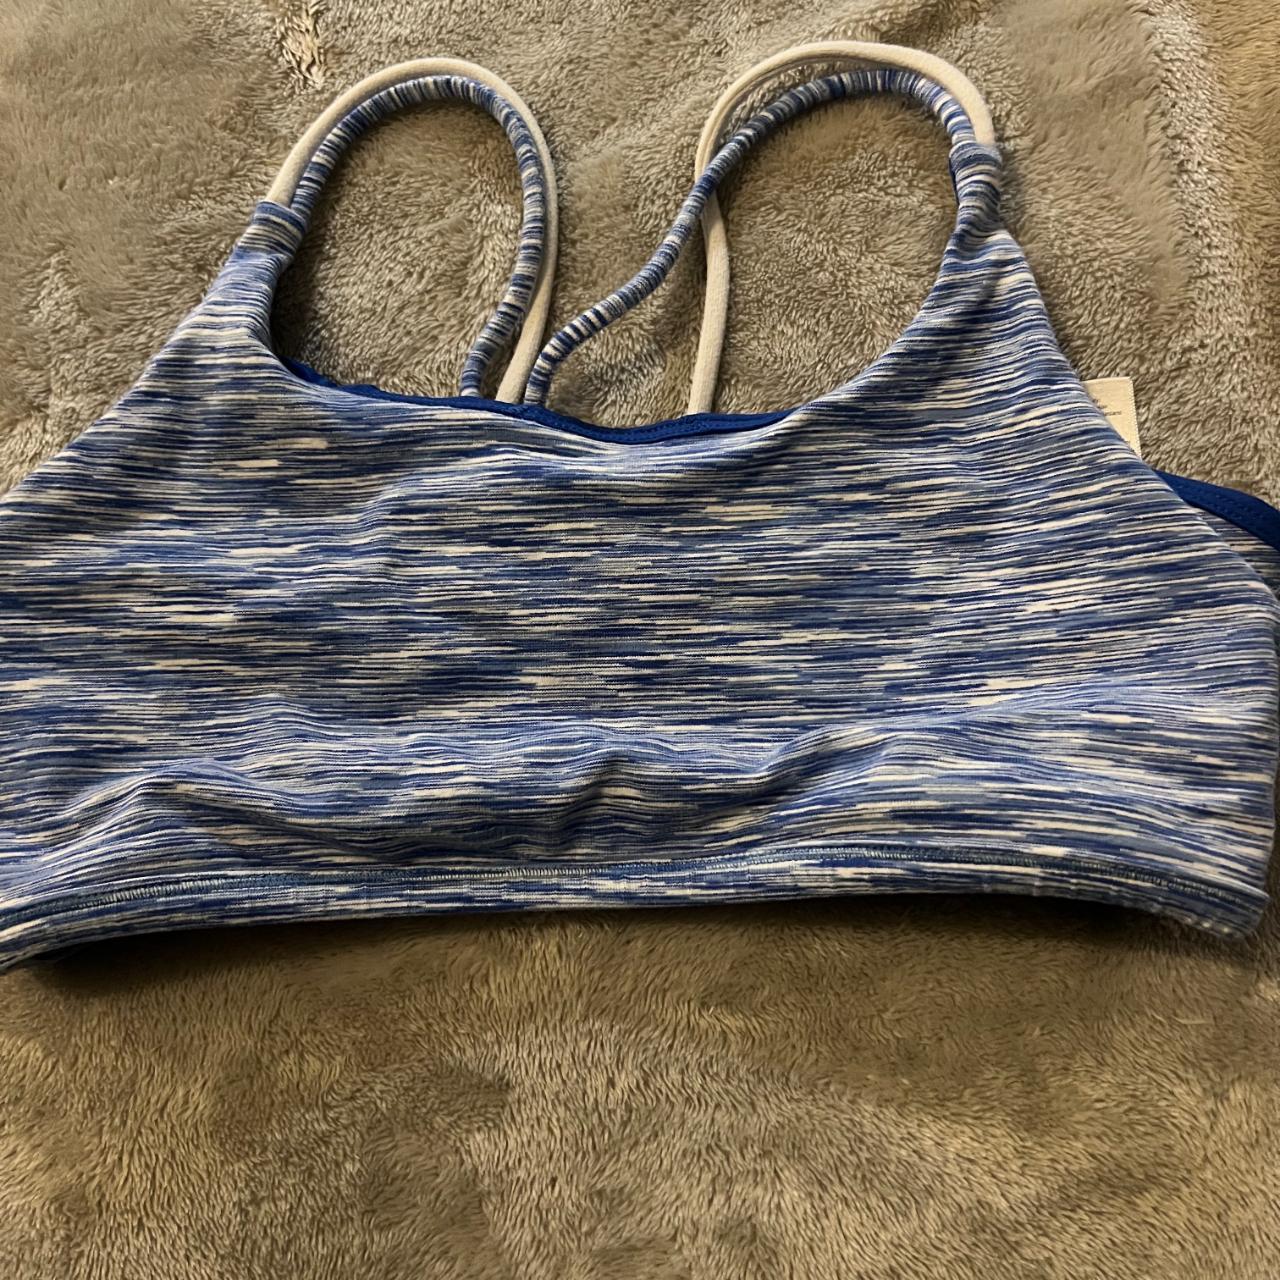 ivivva kids sports bra size 14 but could fit a xs or - Depop